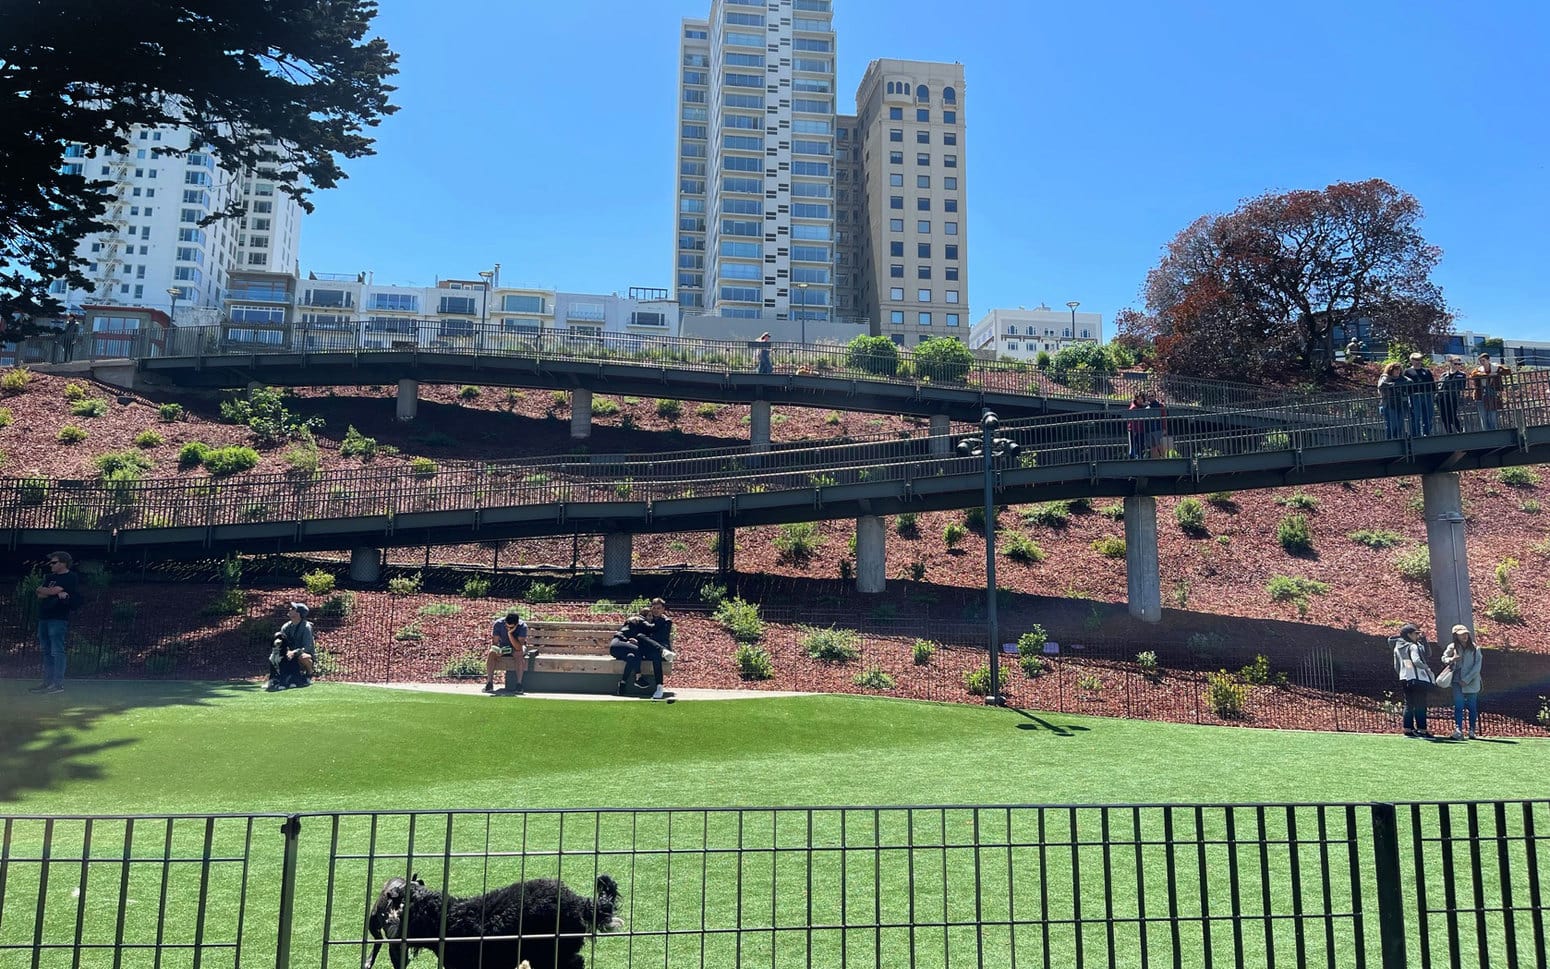 View of elevated walkways from the dog park